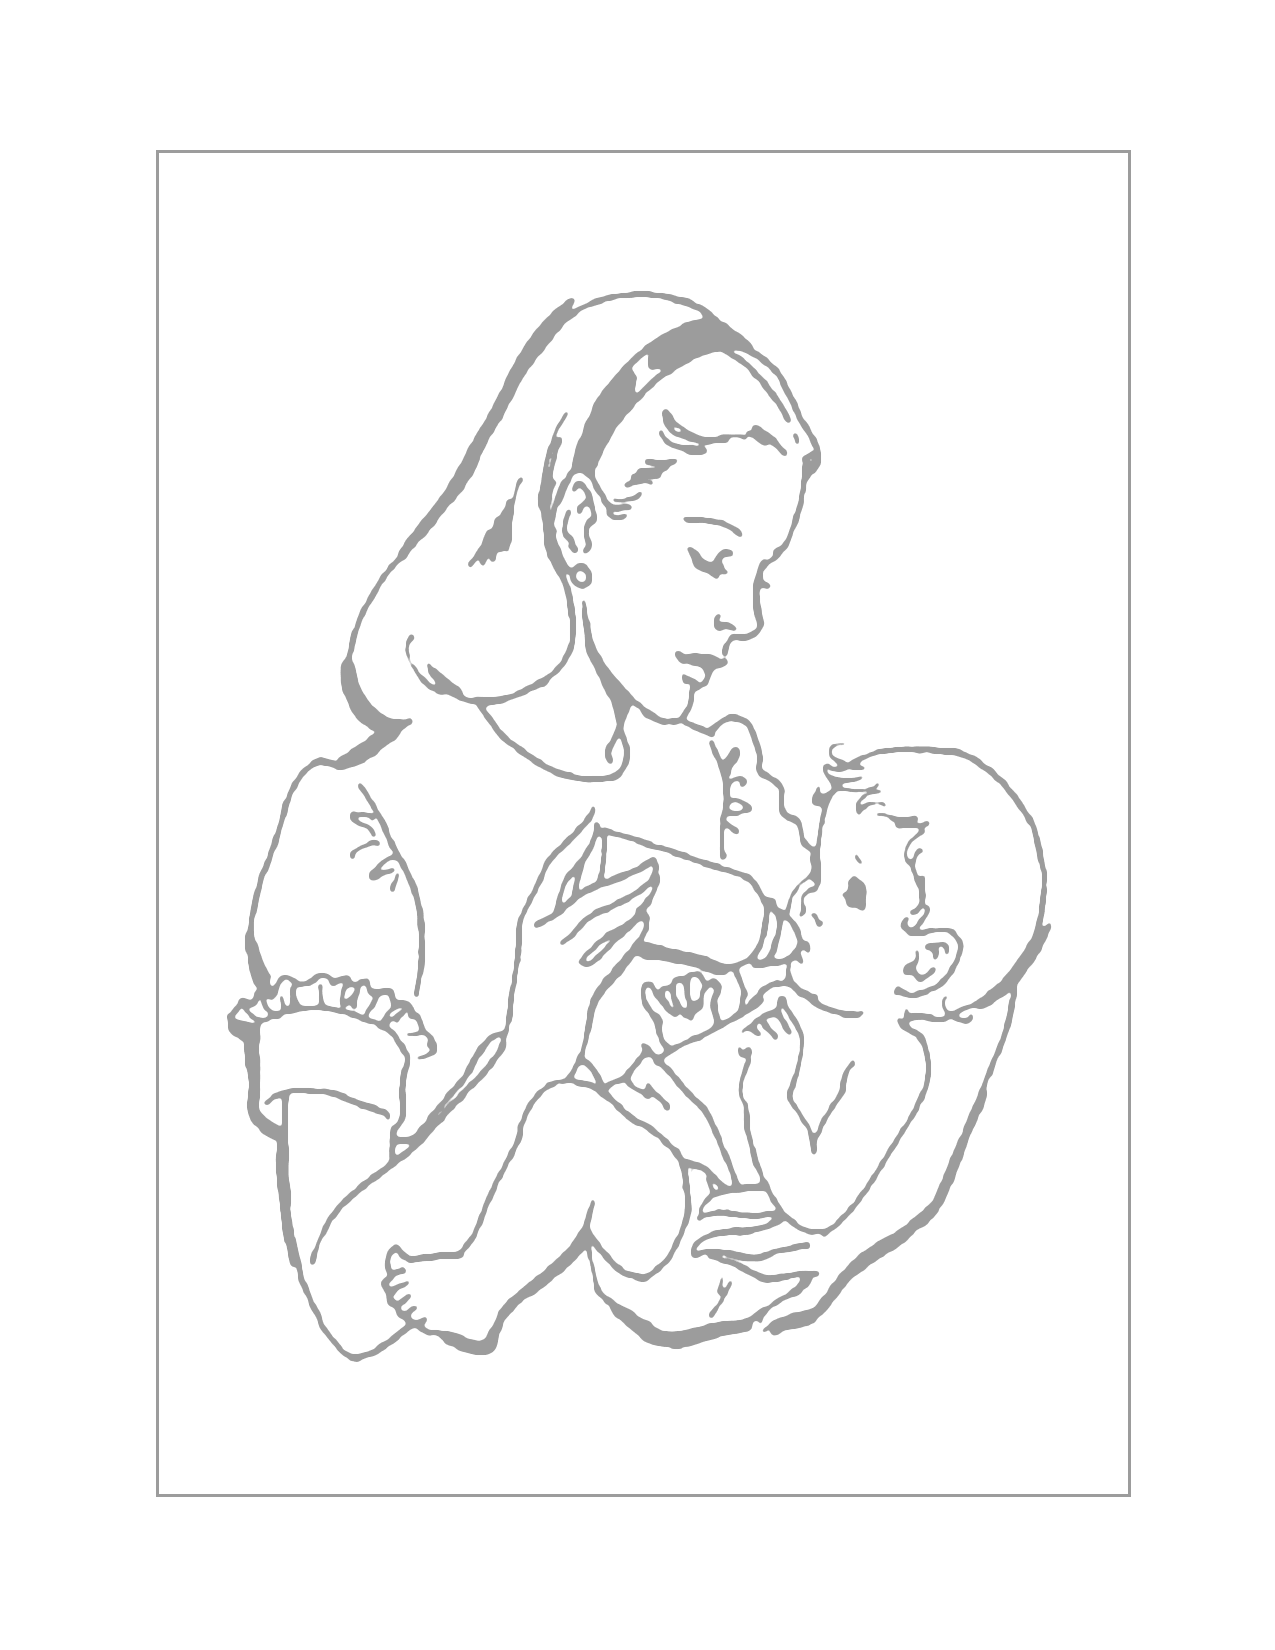 Woman Feeding Bottle To A Baby Traceable Sheet